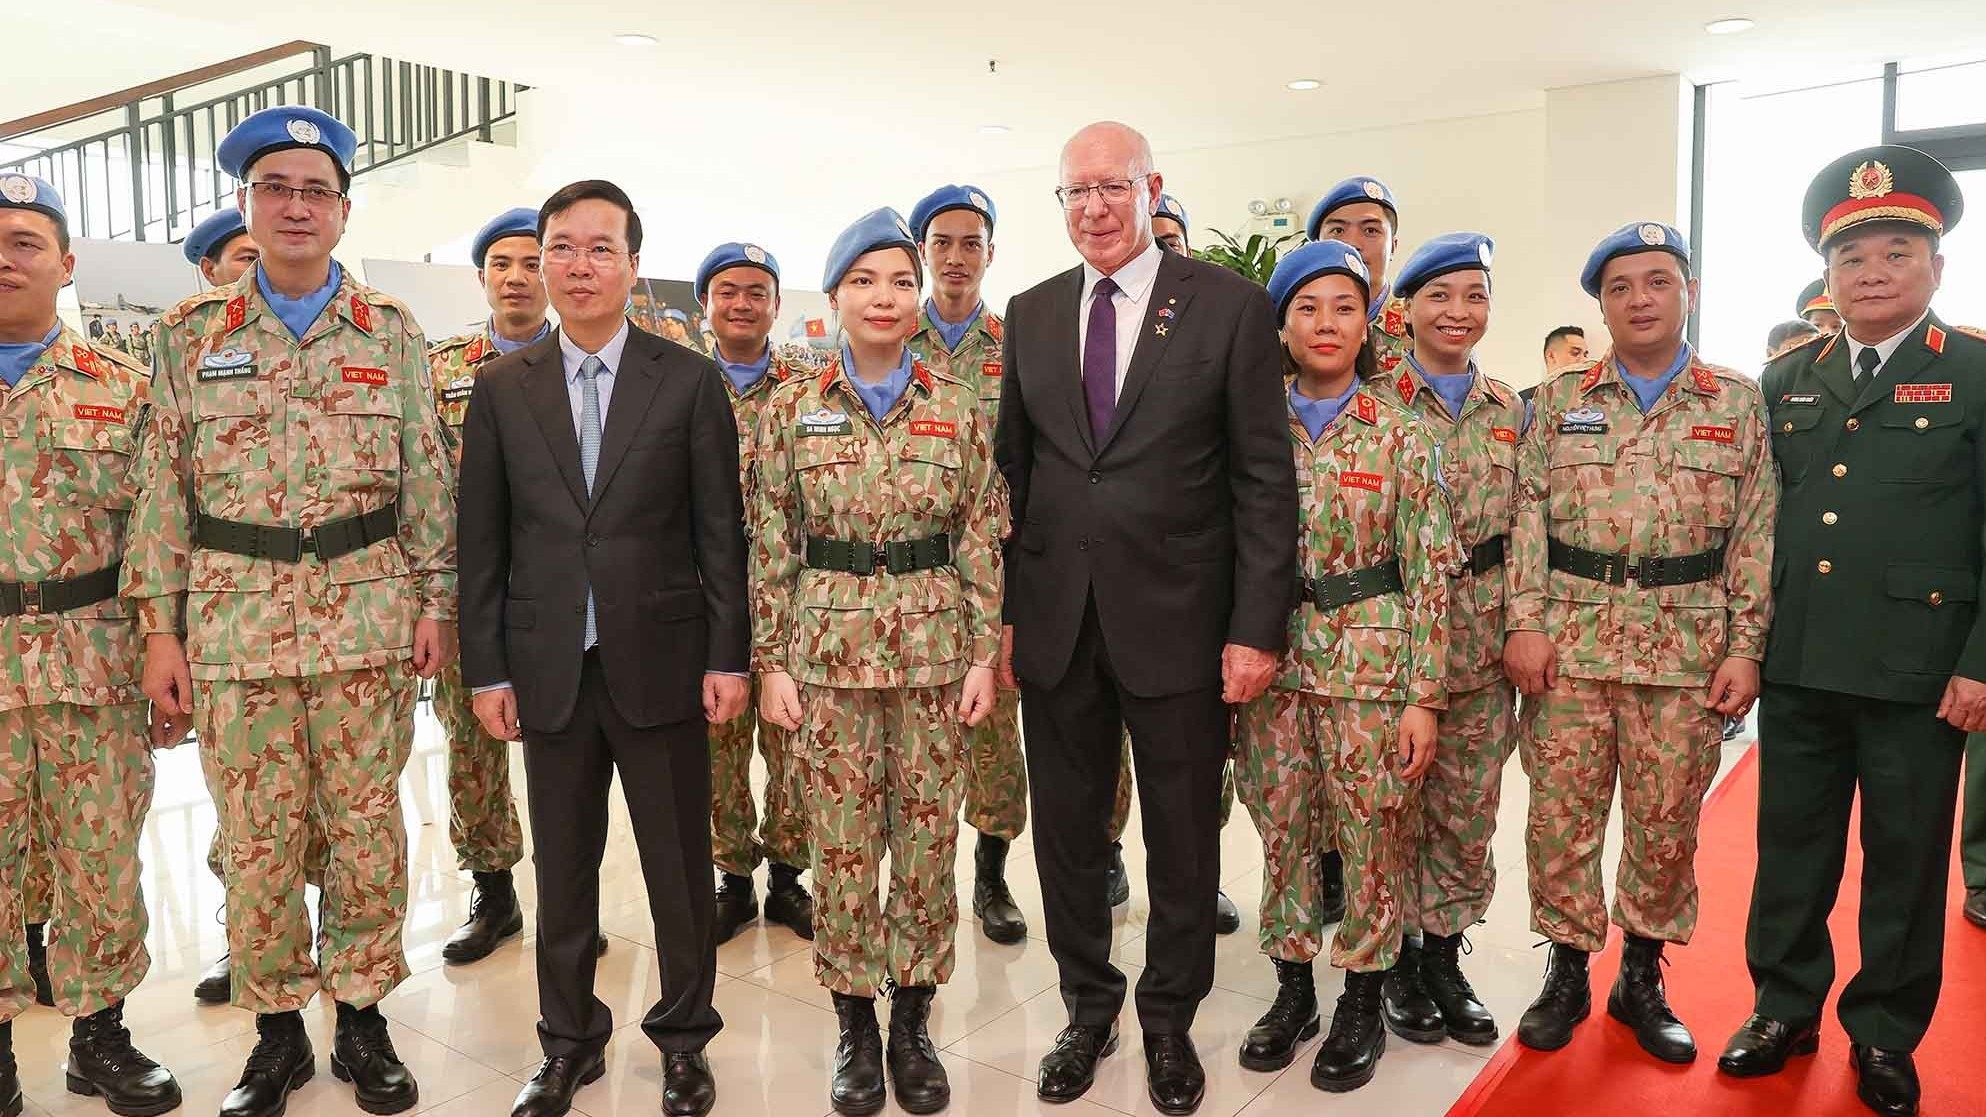 President, Australian Governor-General visit Department of Peacekeeping Operations